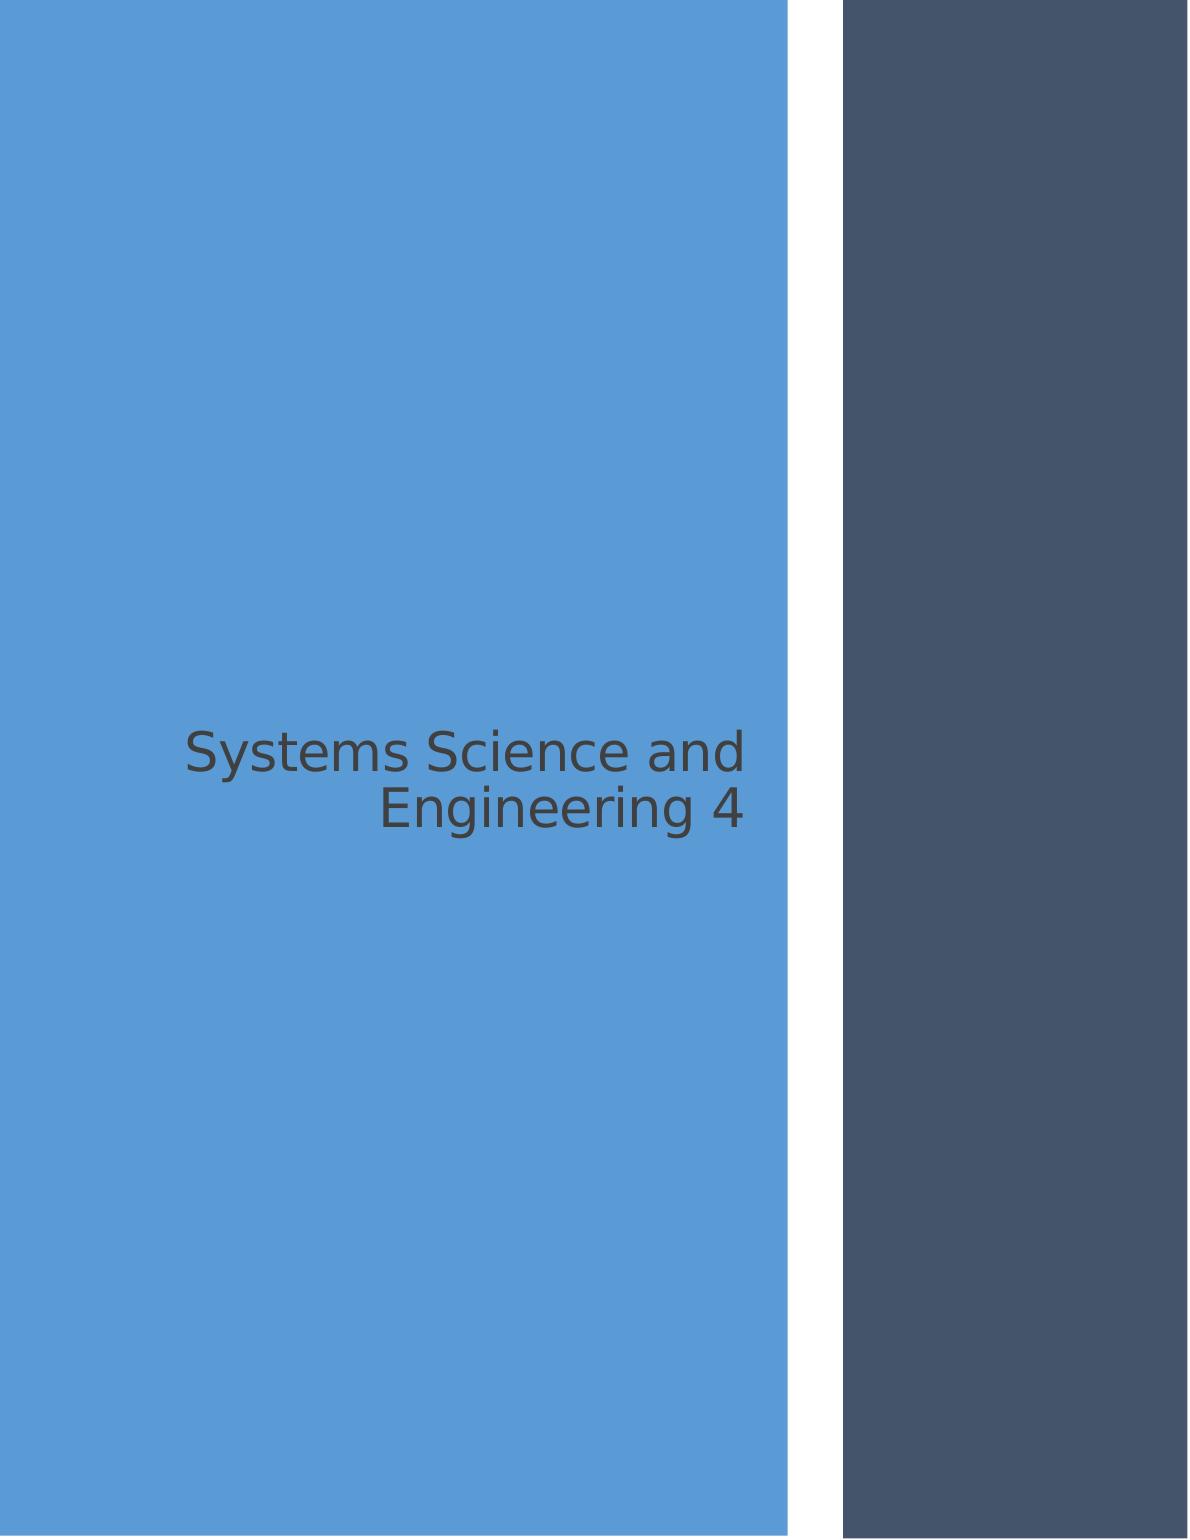 COIT20275 - Systems Science and Engineering Assignment_1